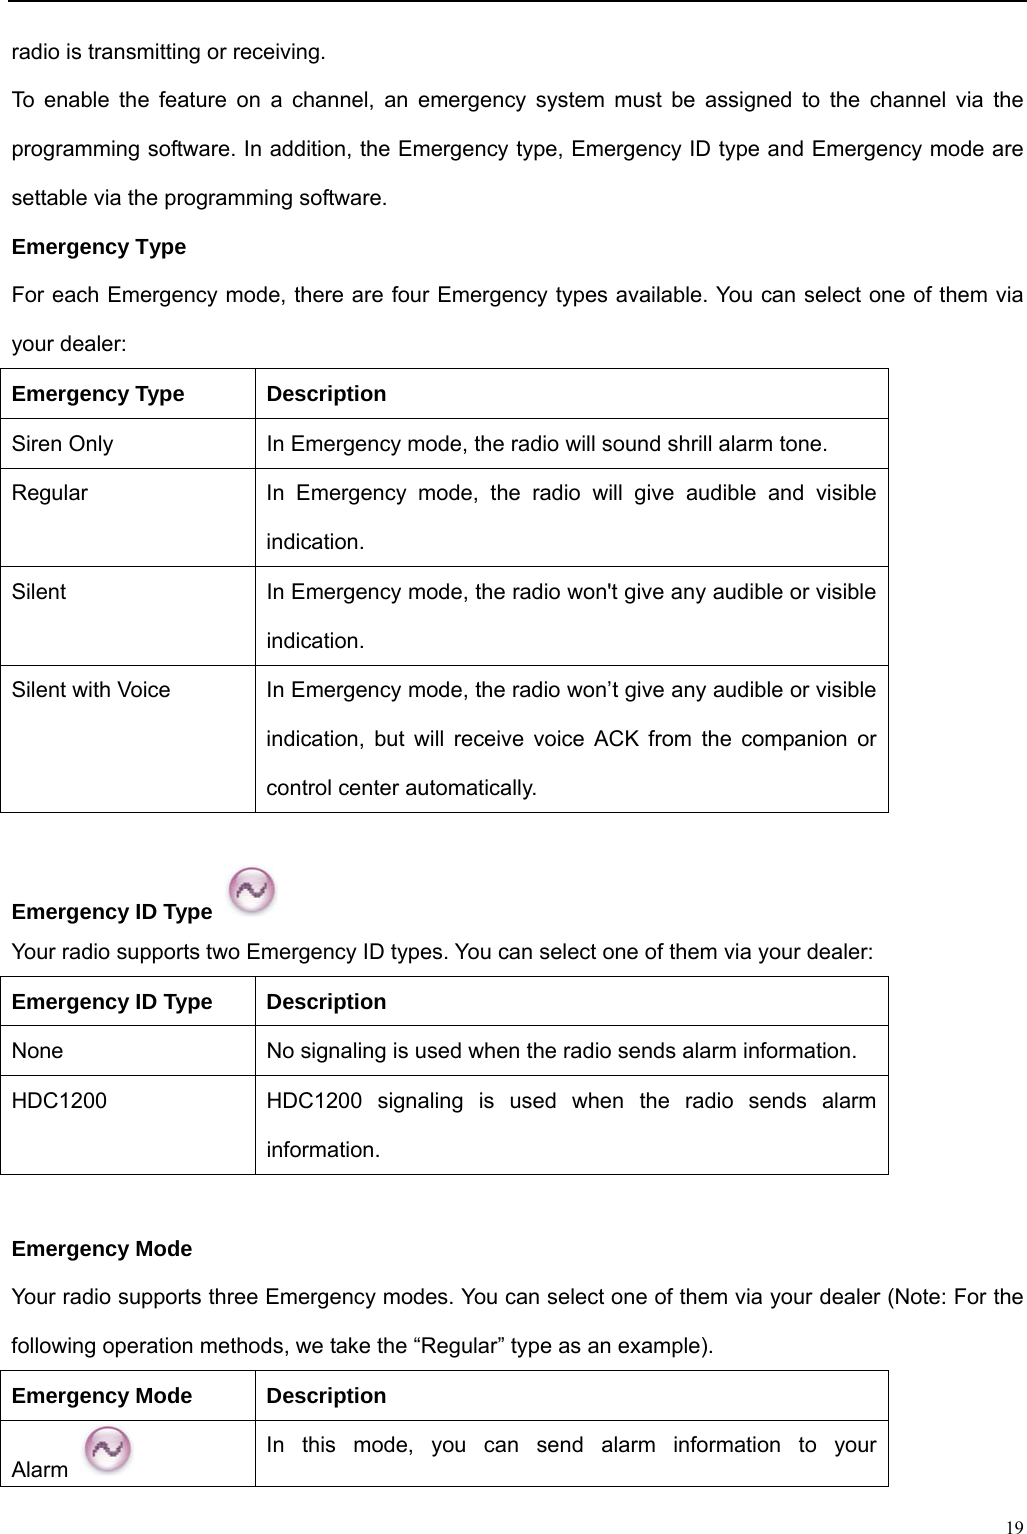                                                                                                            radio is transmitting or receiving.   To enable the feature on a channel, an emergency system must be assigned to the channel via the programming software. In addition, the Emergency type, Emergency ID type and Emergency mode are settable via the programming software.   Emergency Type For each Emergency mode, there are four Emergency types available. You can select one of them via your dealer:   Emergency Type Description Siren Only In Emergency mode, the radio will sound shrill alarm tone.   Regular In Emergency mode, the radio will give audible and visible indication.   Silent In Emergency mode, the radio won&apos;t give any audible or visible indication.   Silent with Voice In Emergency mode, the radio won’t give any audible or visible indication, but will receive voice ACK from the companion or control center automatically.    Emergency ID Type   Your radio supports two Emergency ID types. You can select one of them via your dealer:   Emergency ID Type Description None No signaling is used when the radio sends alarm information. HDC1200 HDC1200 signaling is used when the radio sends alarm information.  Emergency Mode Your radio supports three Emergency modes. You can select one of them via your dealer (Note: For the following operation methods, we take the “Regular” type as an example). Emergency Mode Description Alarm   In this mode, you can send alarm information to your   19